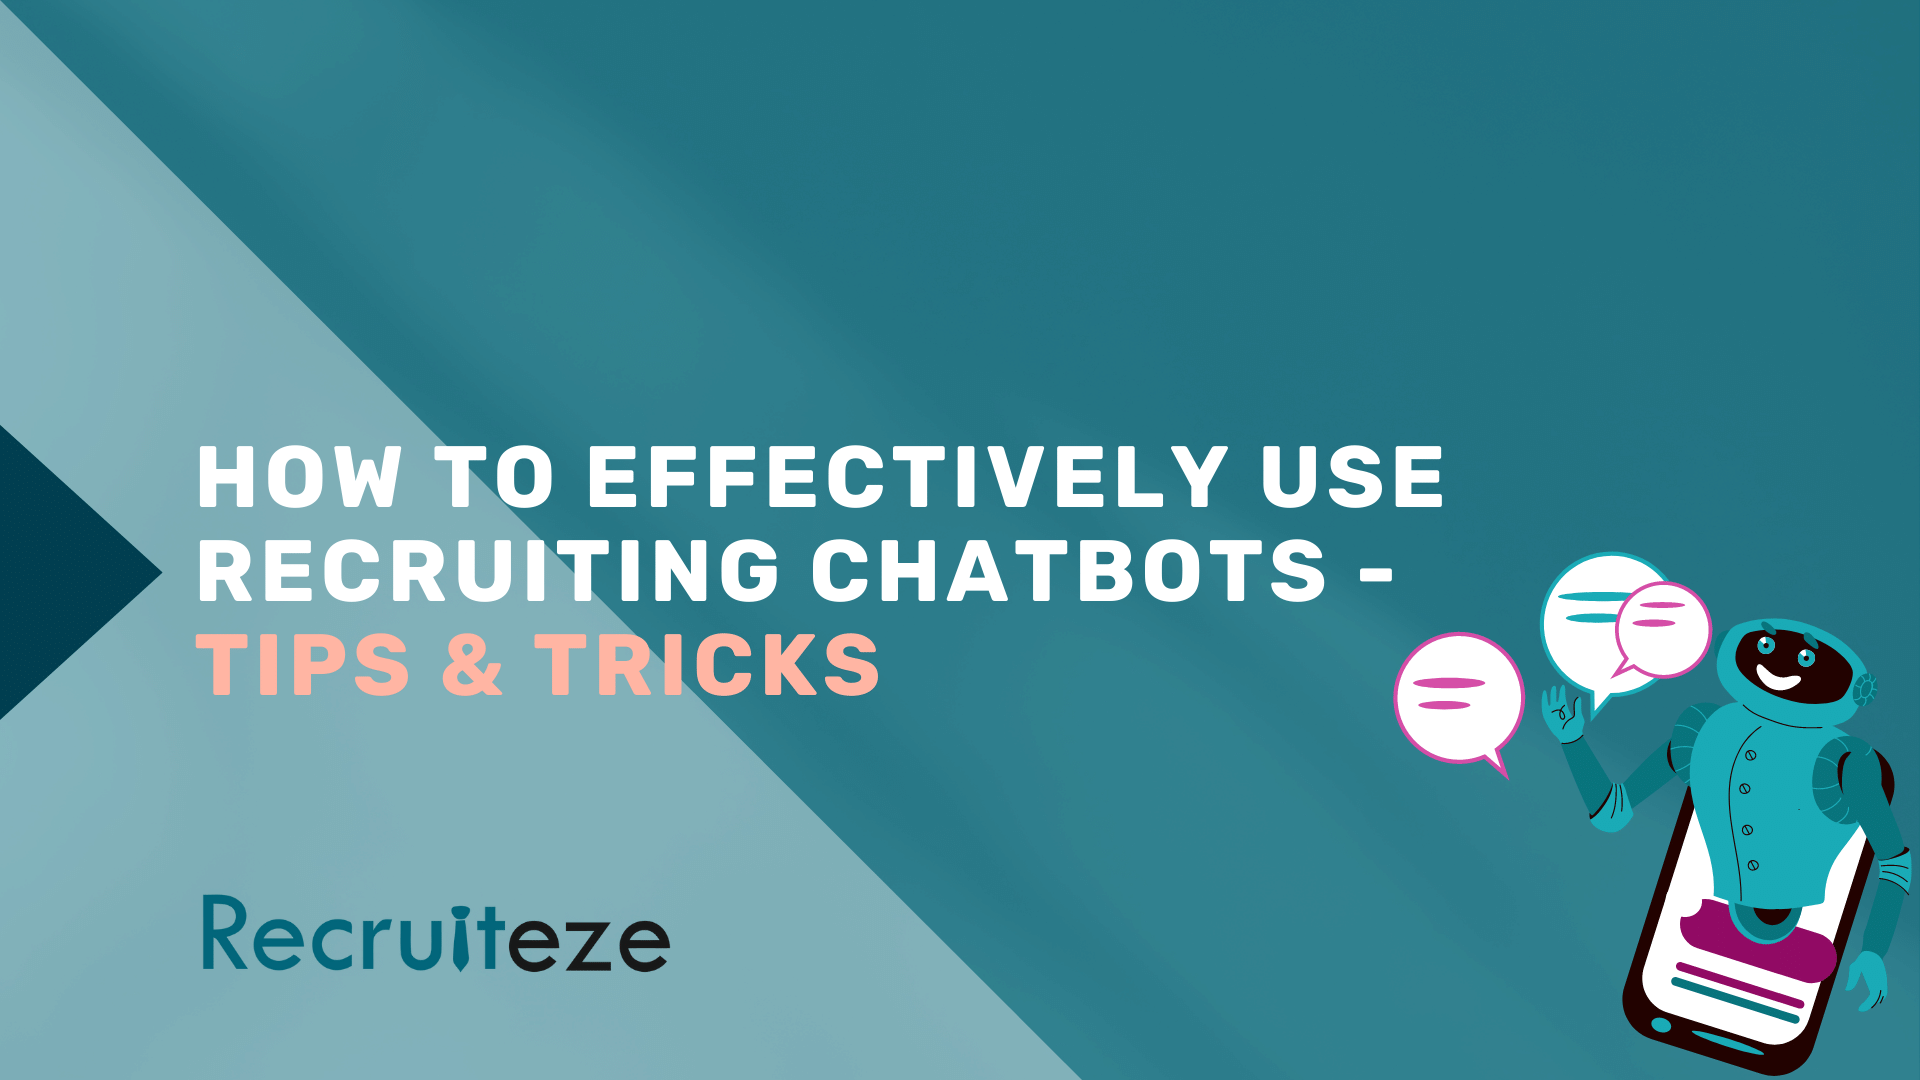 How to Effectively Use Recruiting Chatbots - Tips and Tricks